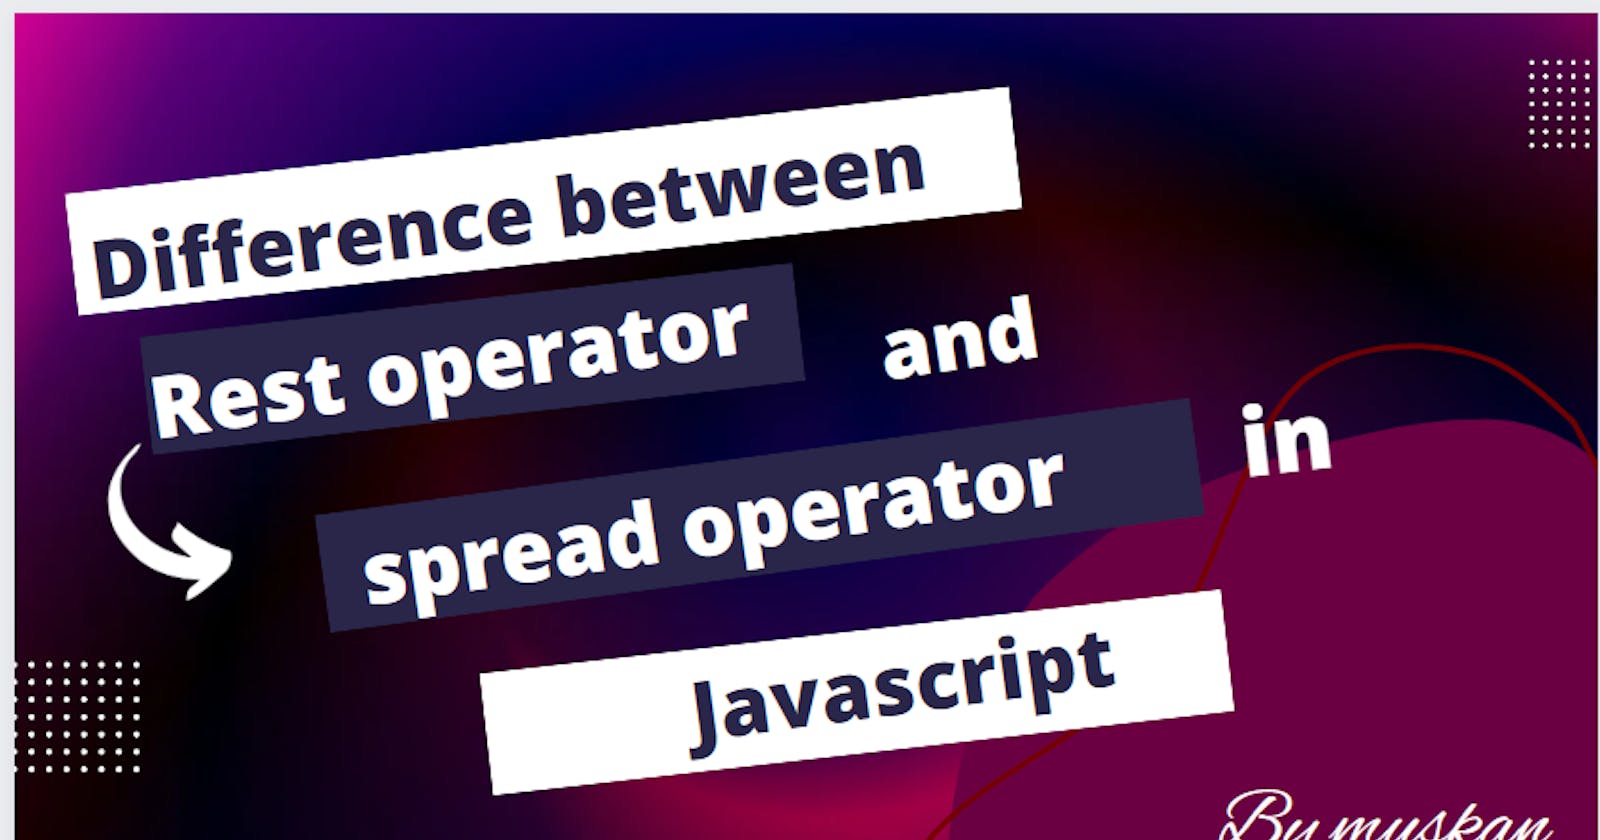 Difference between spread and rest operators in javascript